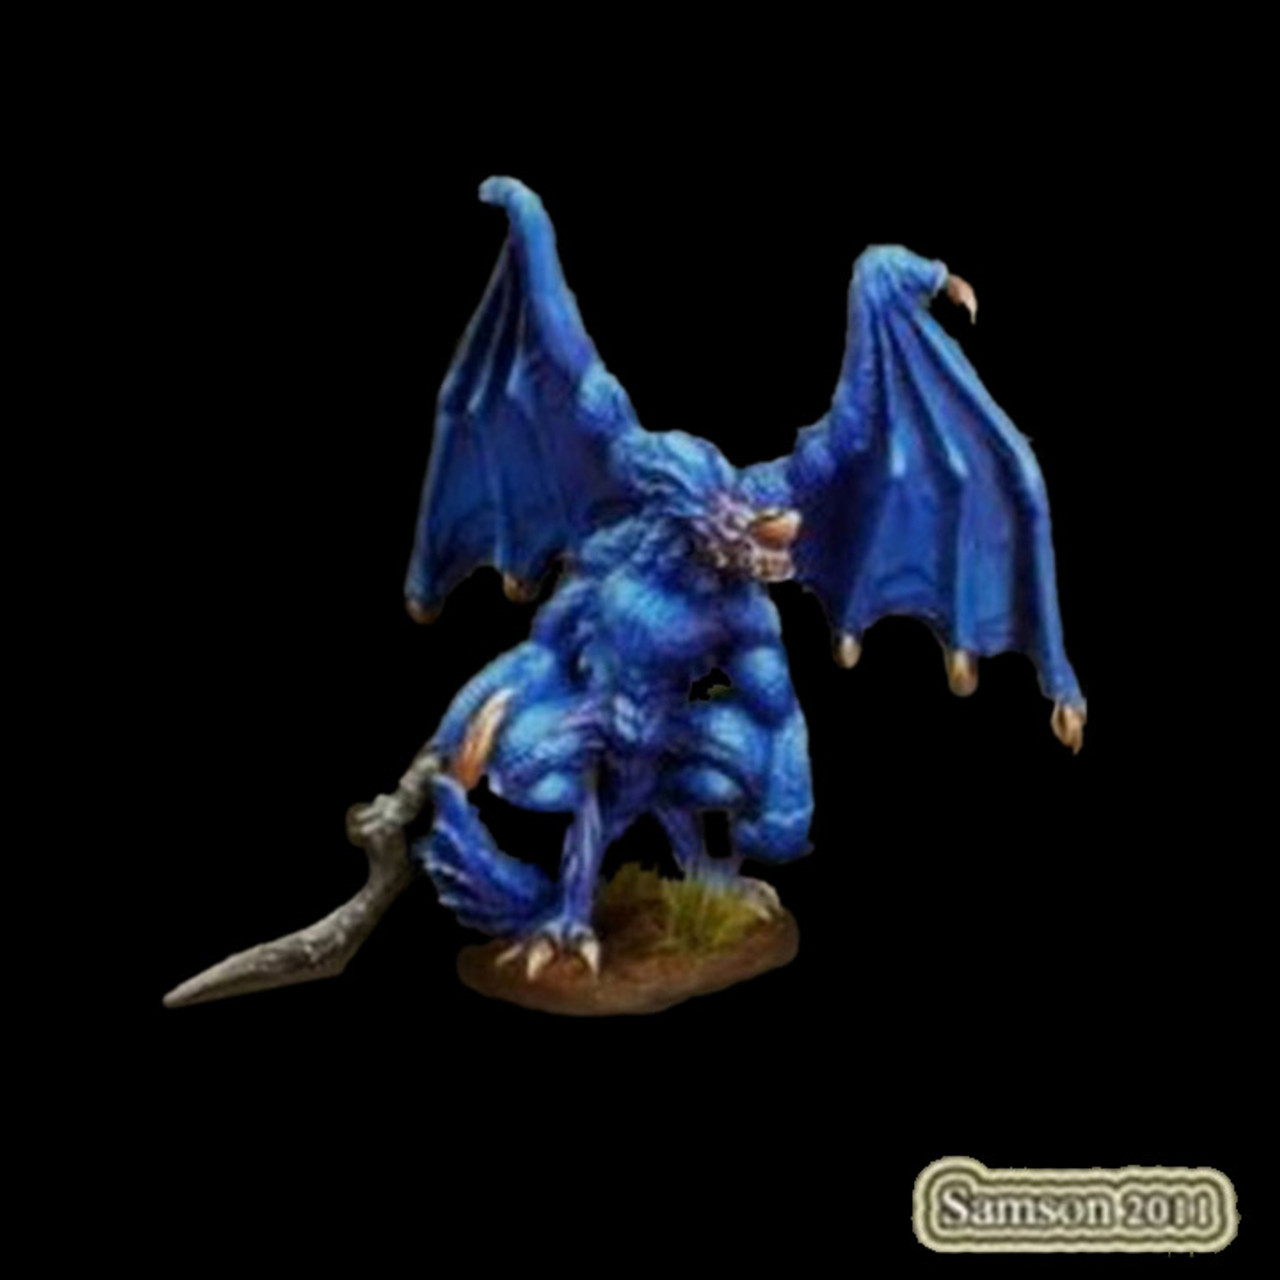 Dungeons & Dragons LL08018 Winged Feathered Serpent 28mm Scale